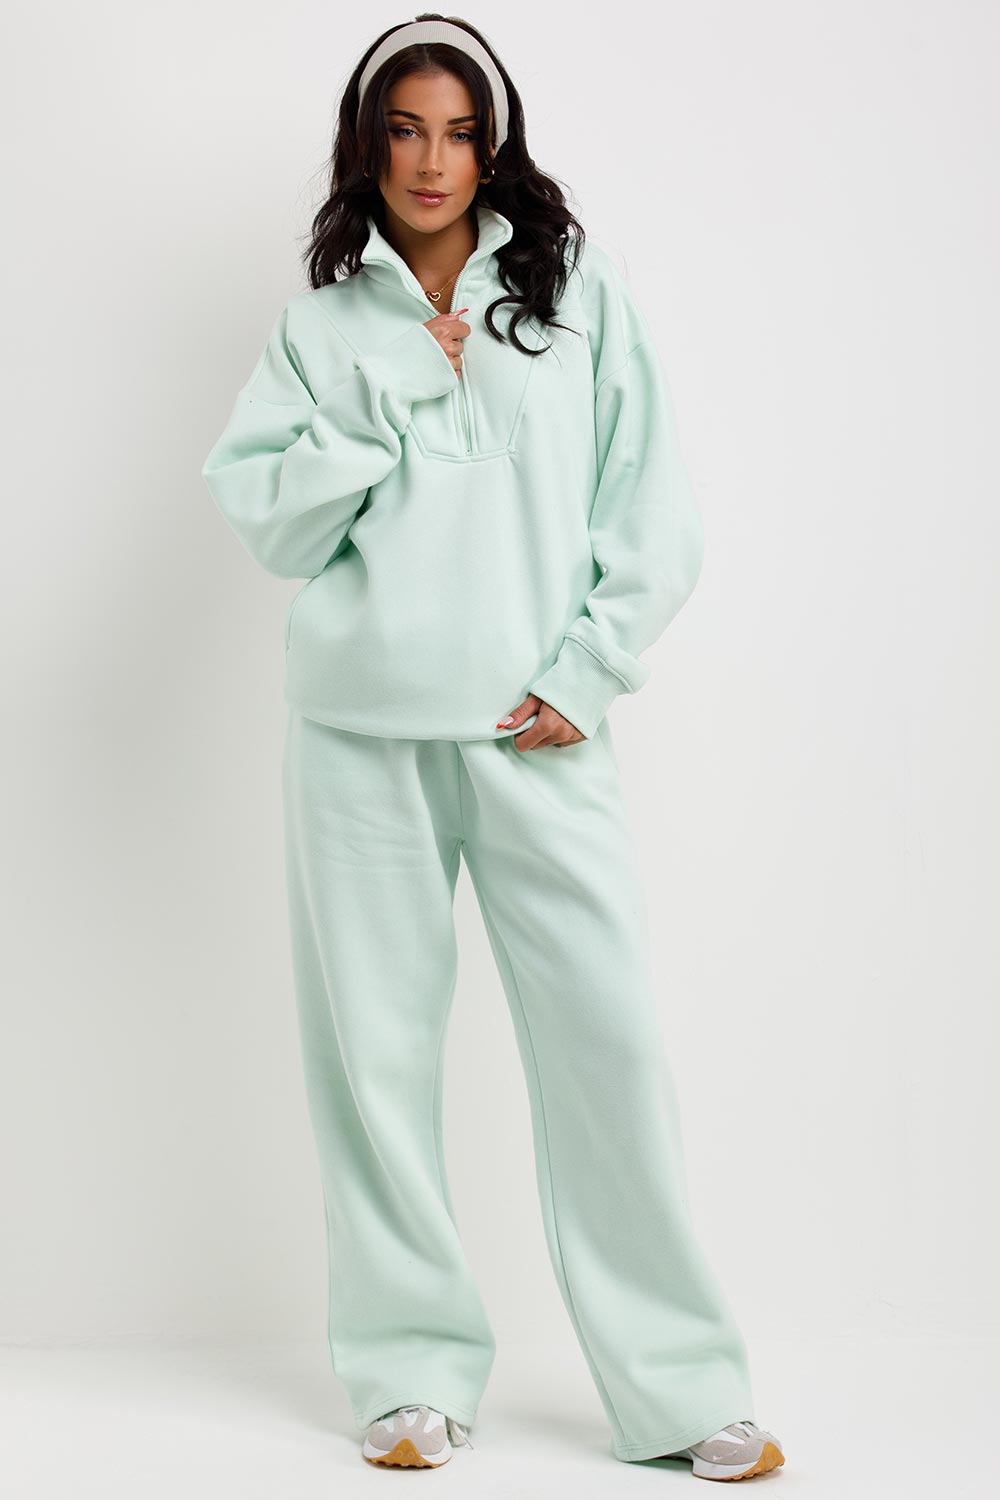 womens half zip sweatshirt and joggers loungewear set airport outfit